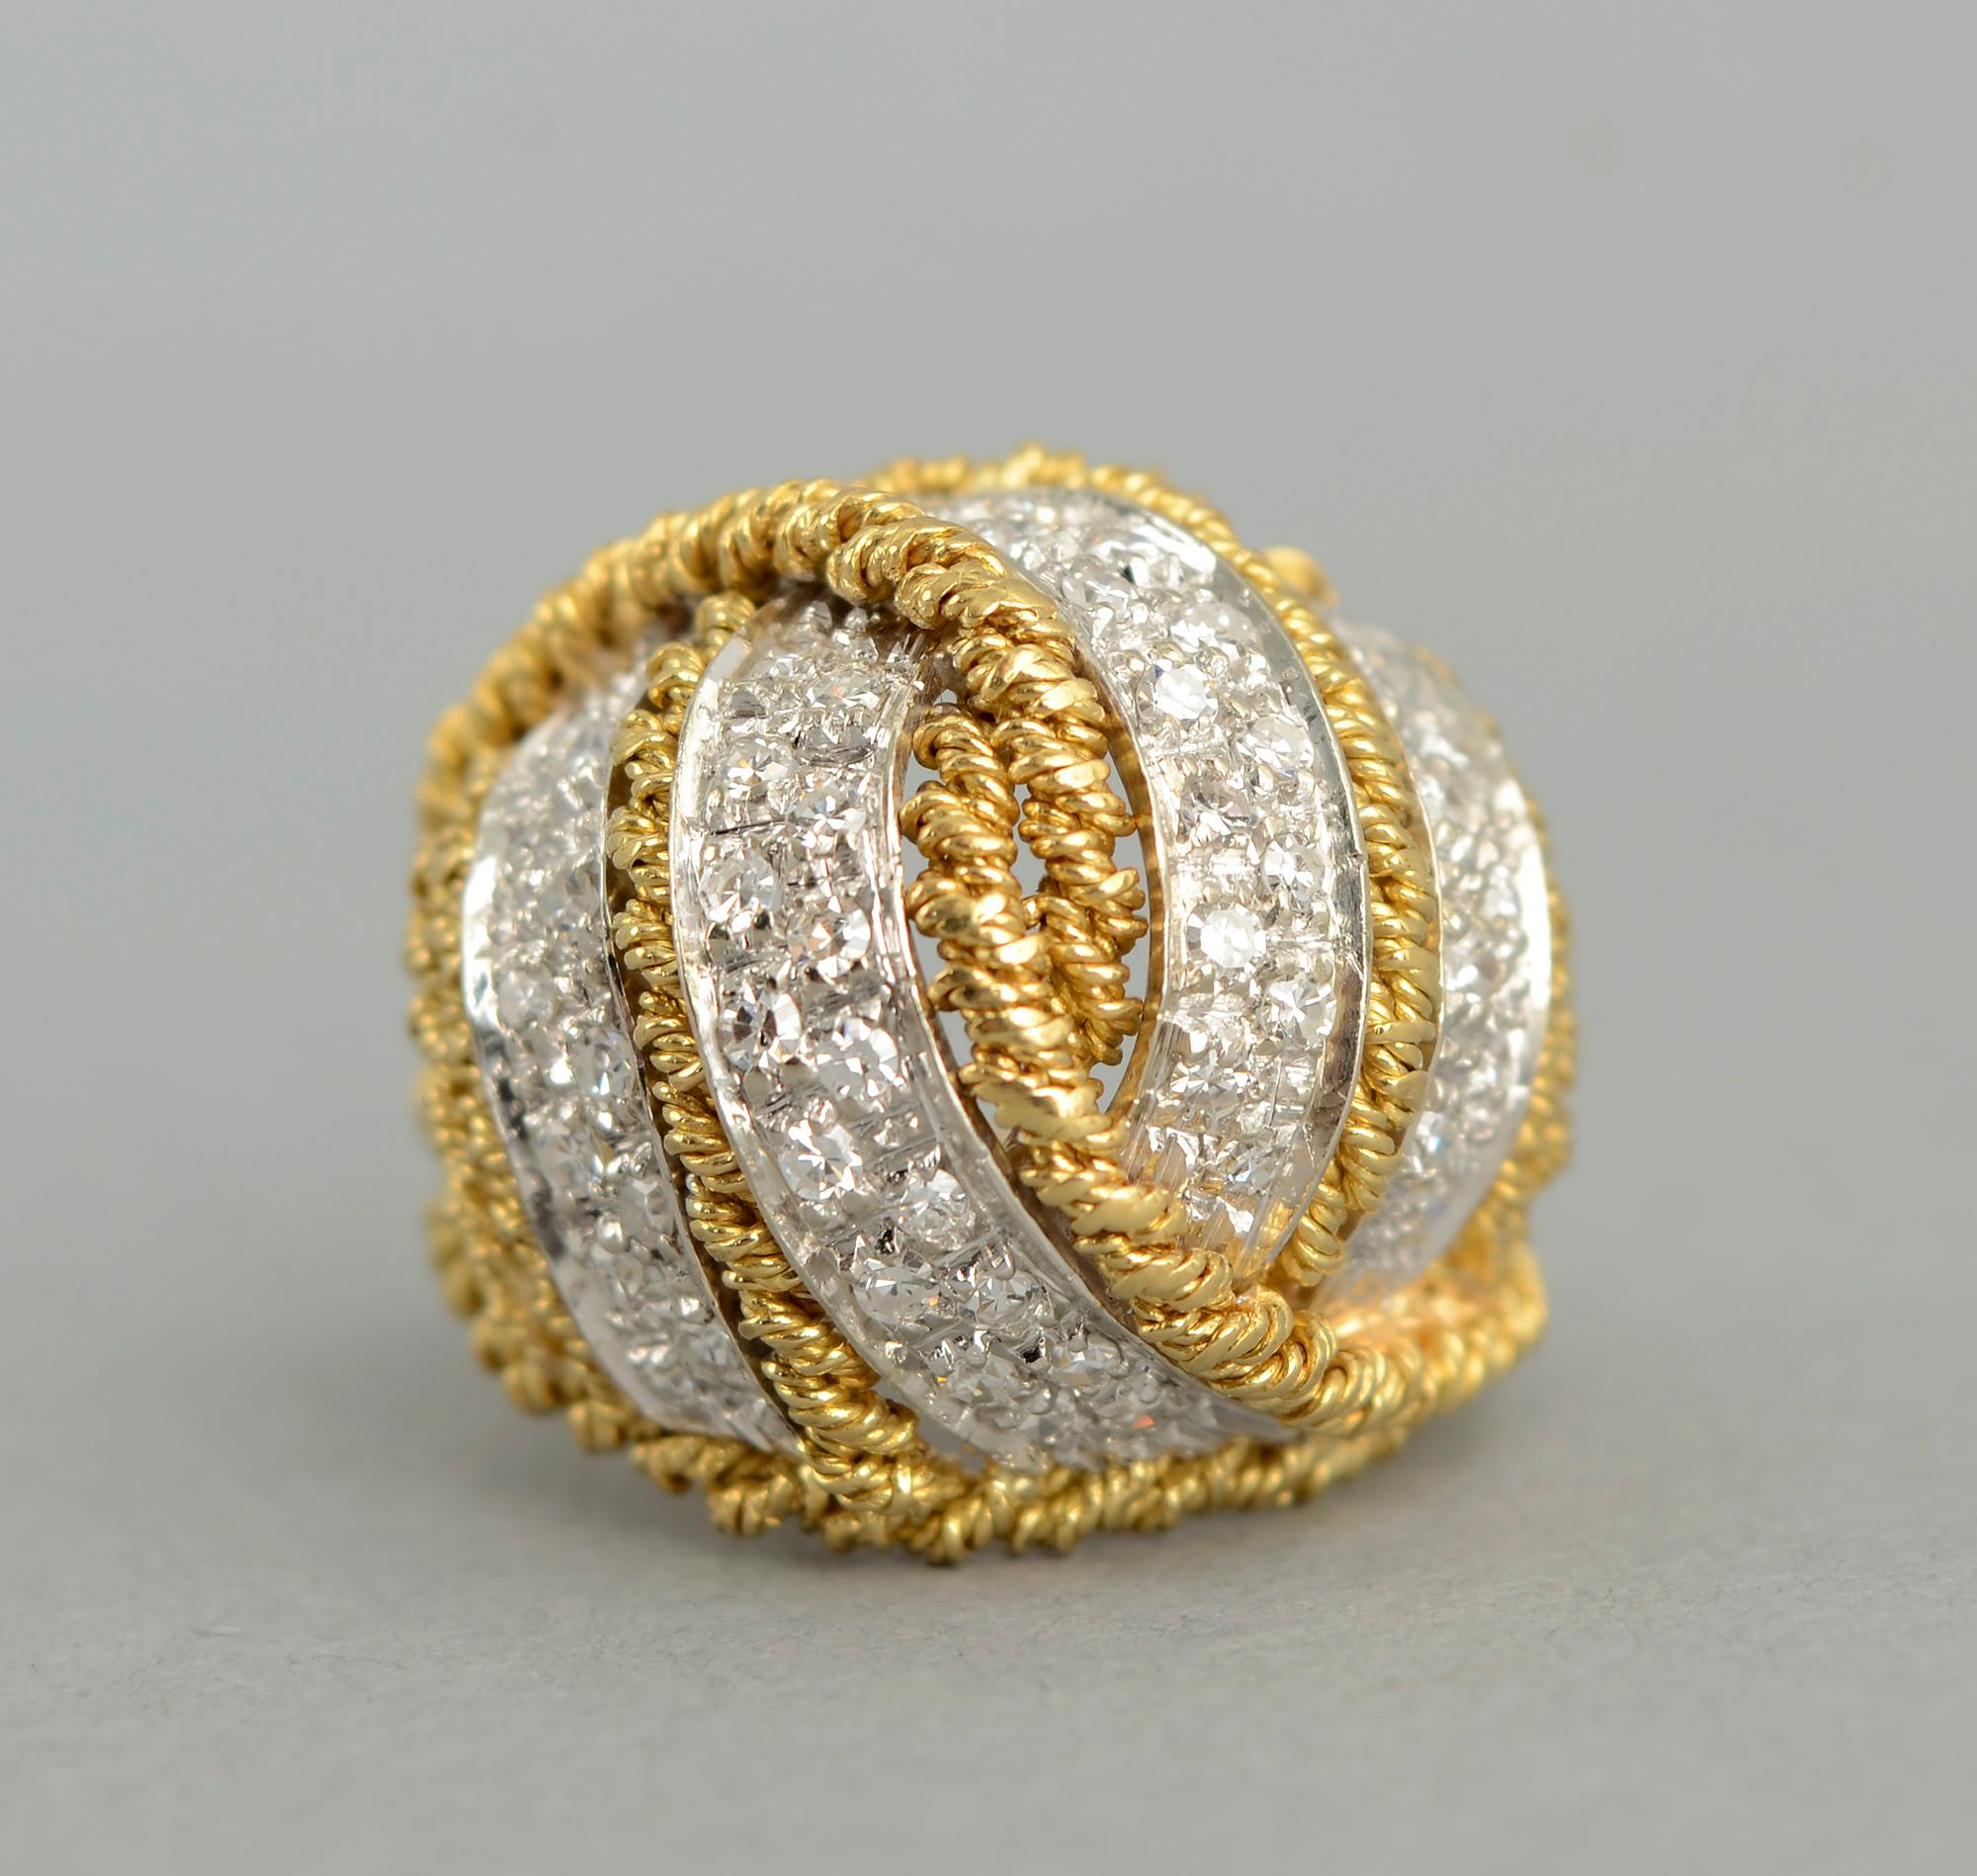 Elegant  domed cocktail ring with diamonds and a design of intertwined twisted 18 karat gold banding. The ring has a total diamond weight of approximately 1.2 carats; stones are SI 1. The ring is size 6 1/4. The dome is 5/8